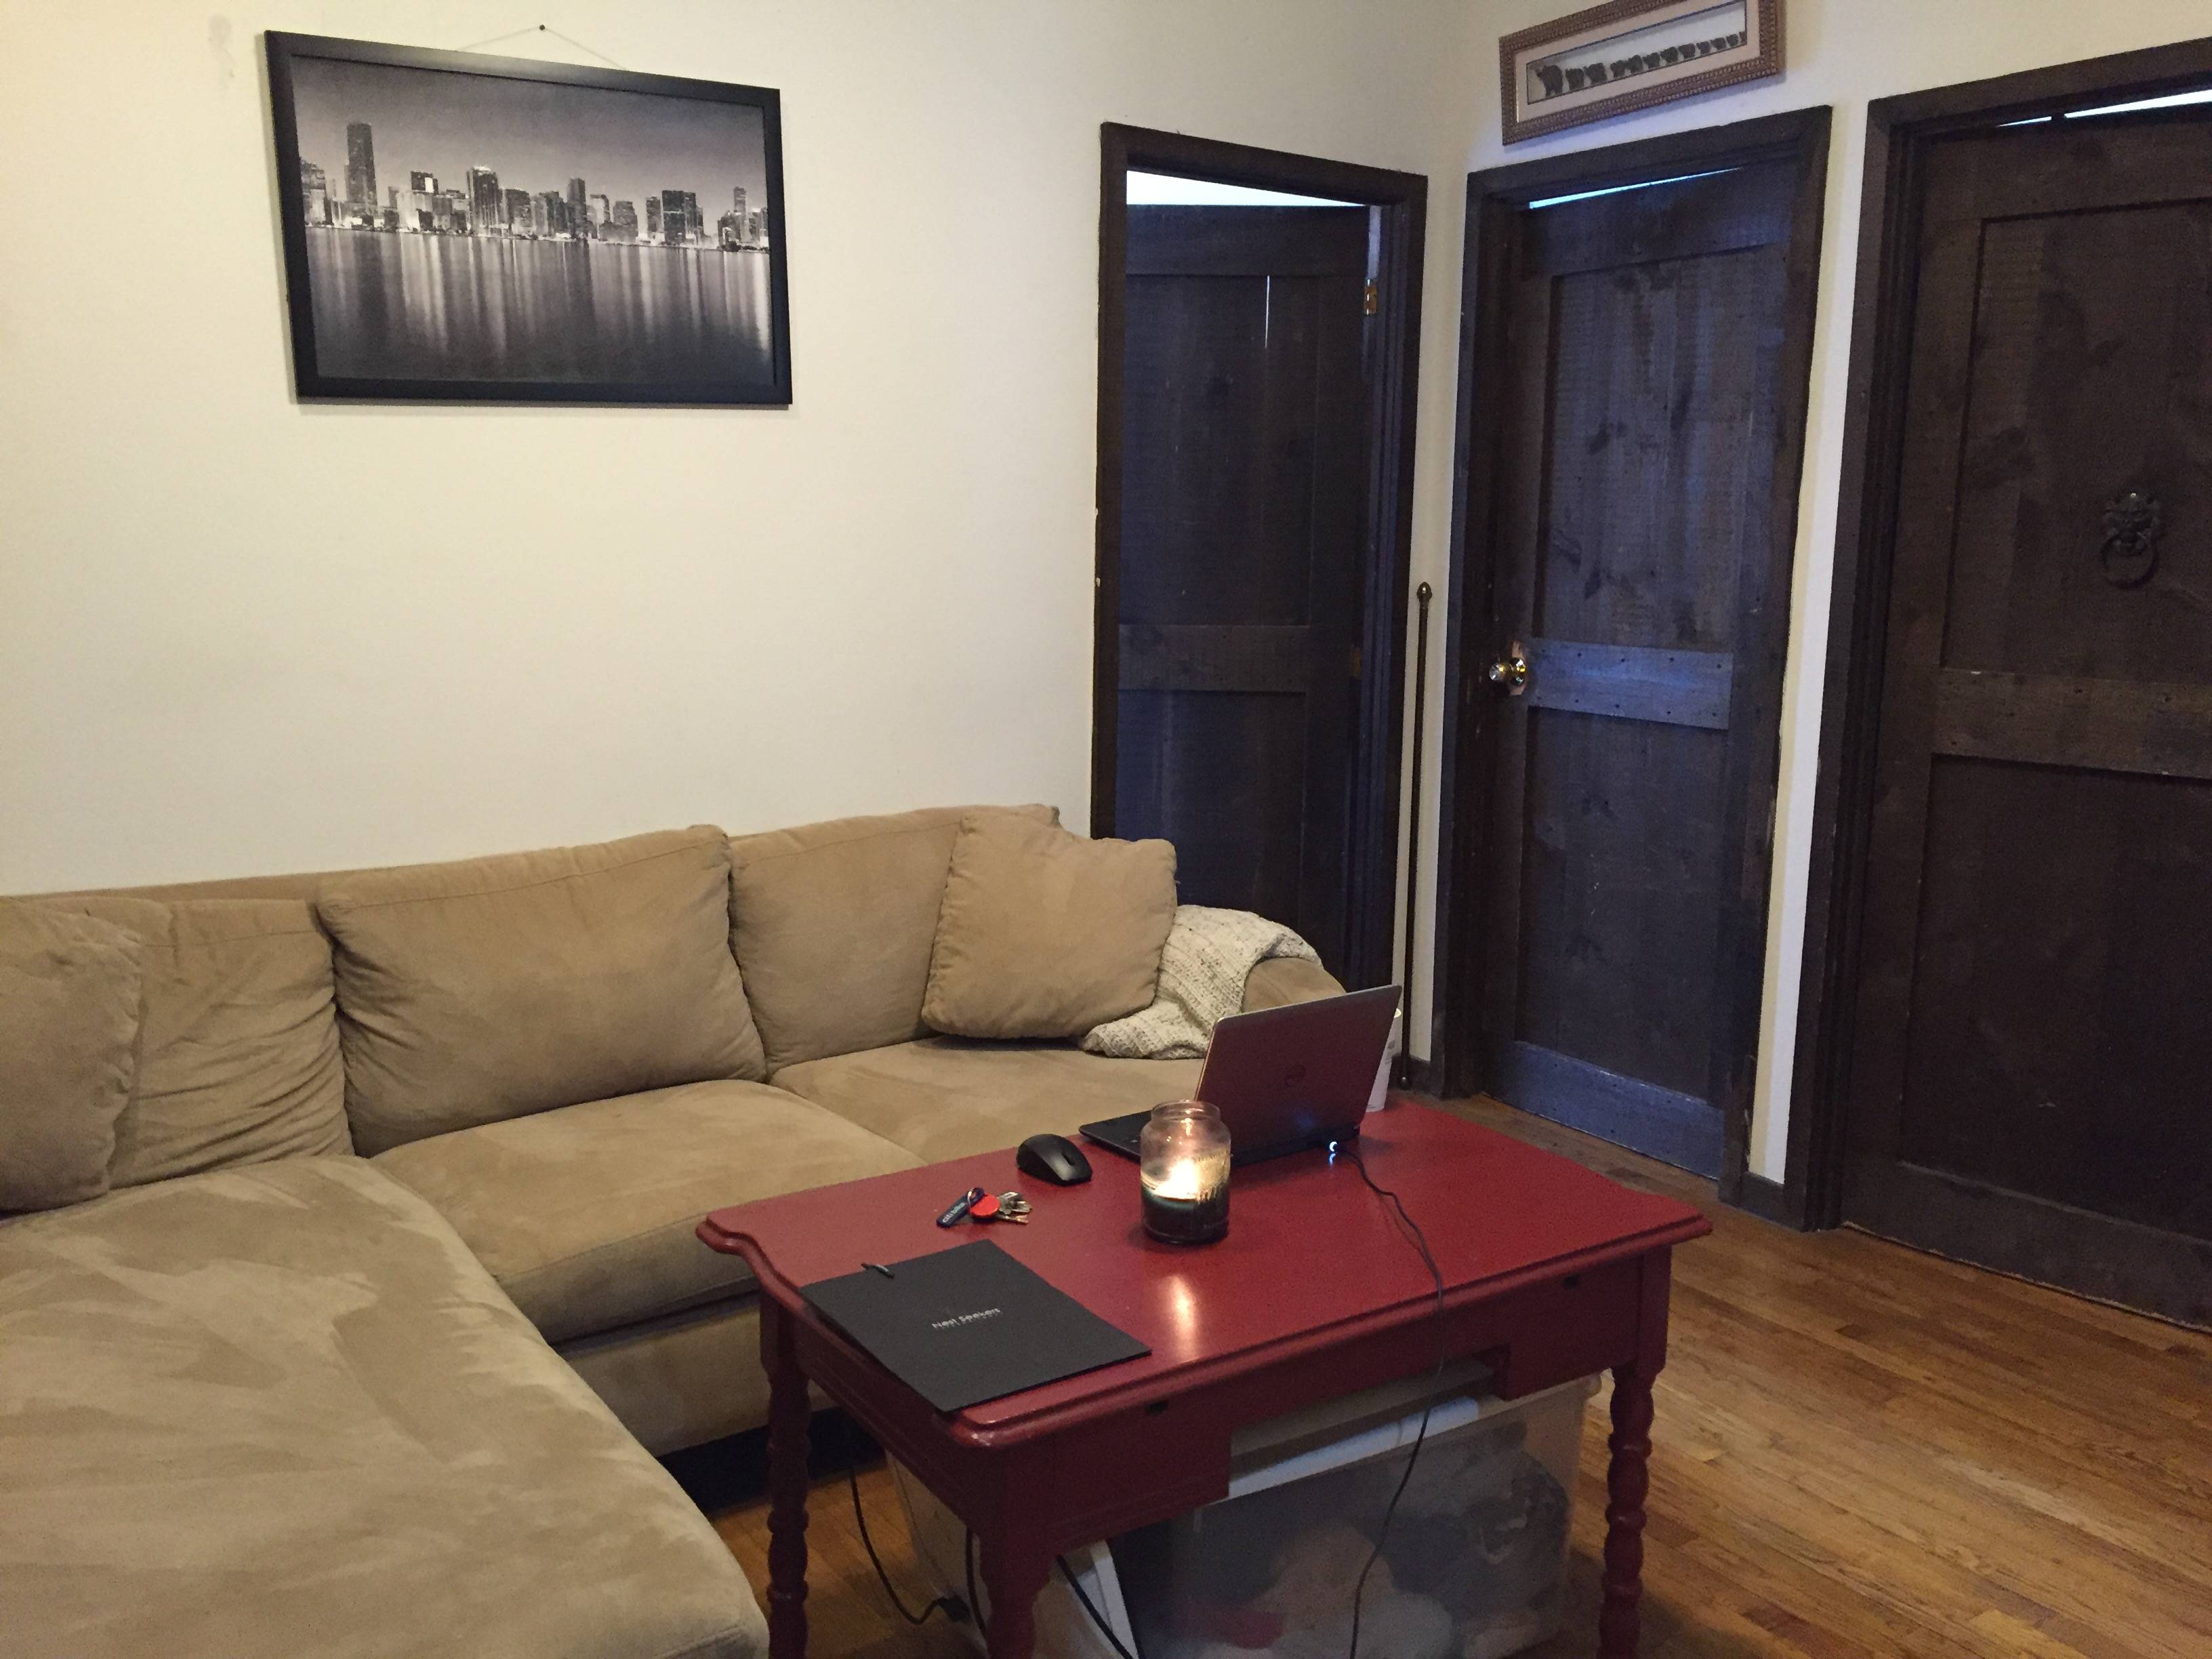 East Village: True 4 Bedroom/2 Baths with Washer/Dryer in Unit